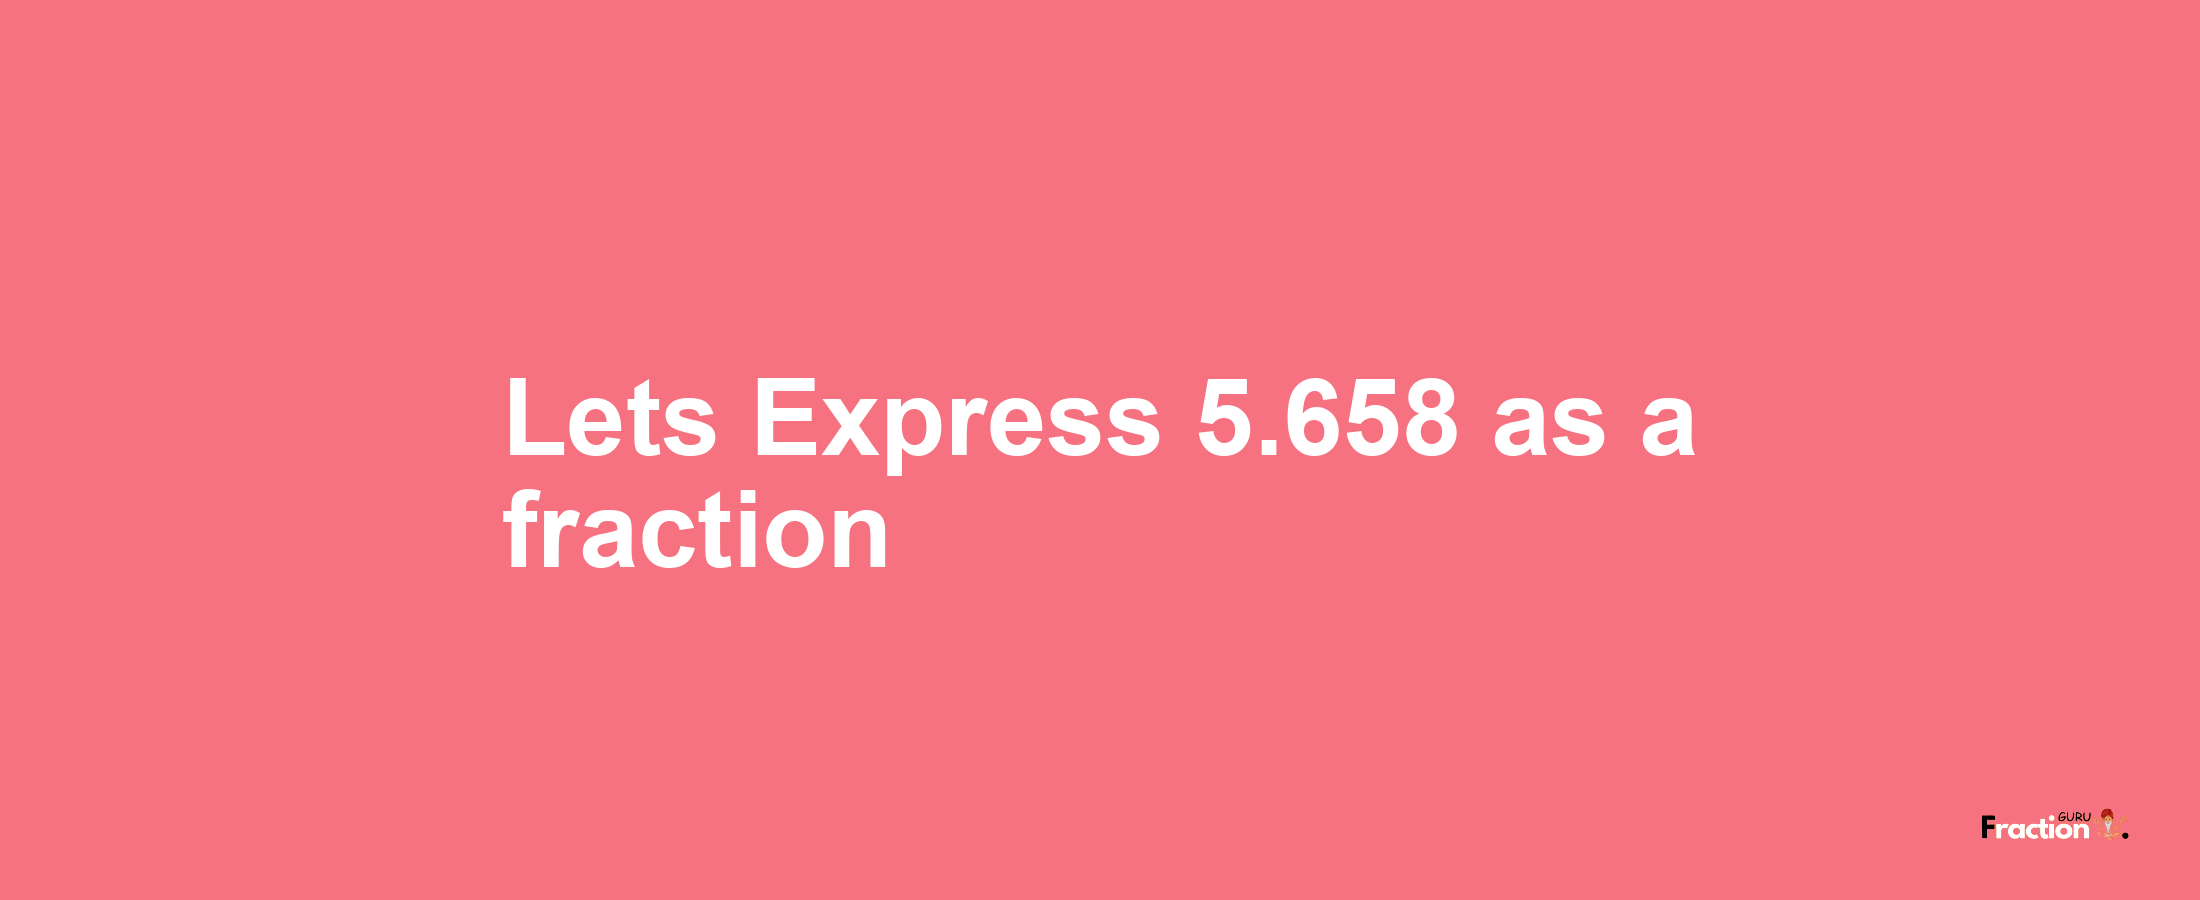 Lets Express 5.658 as afraction